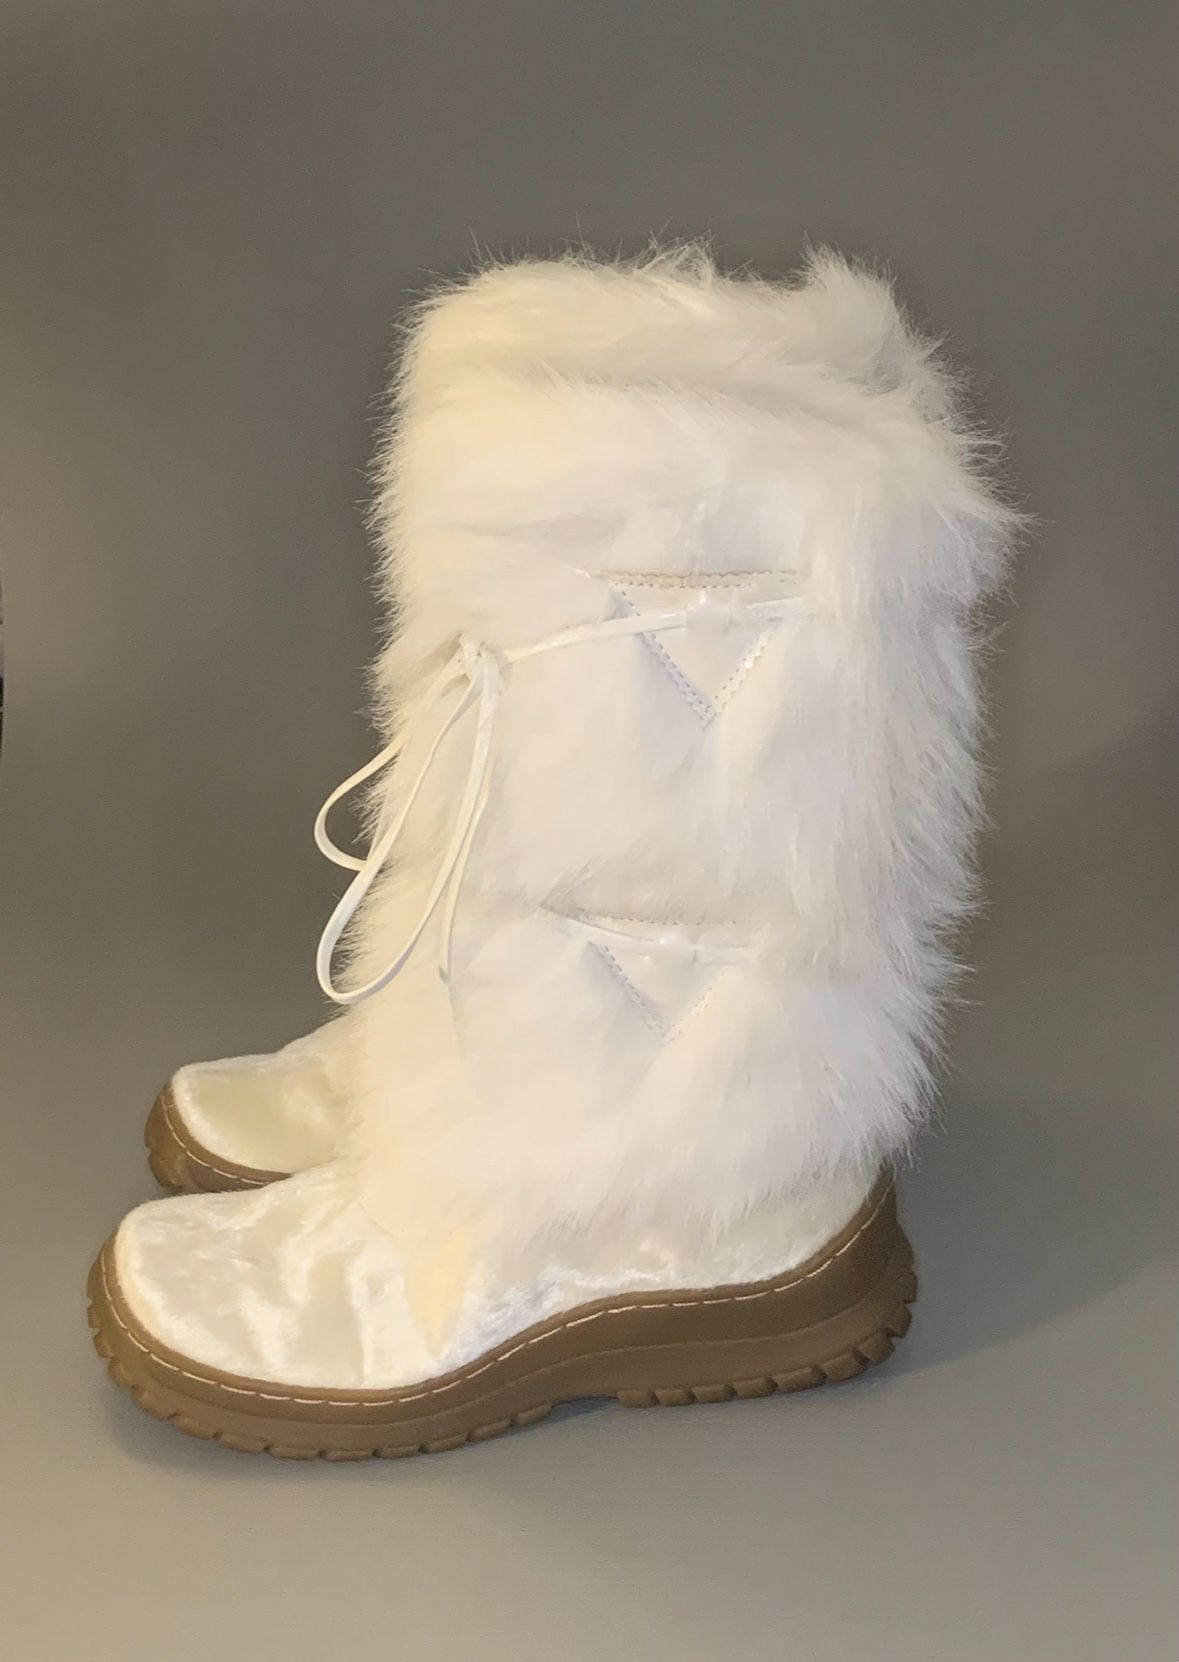 New, Synthetic White Fur Boots 